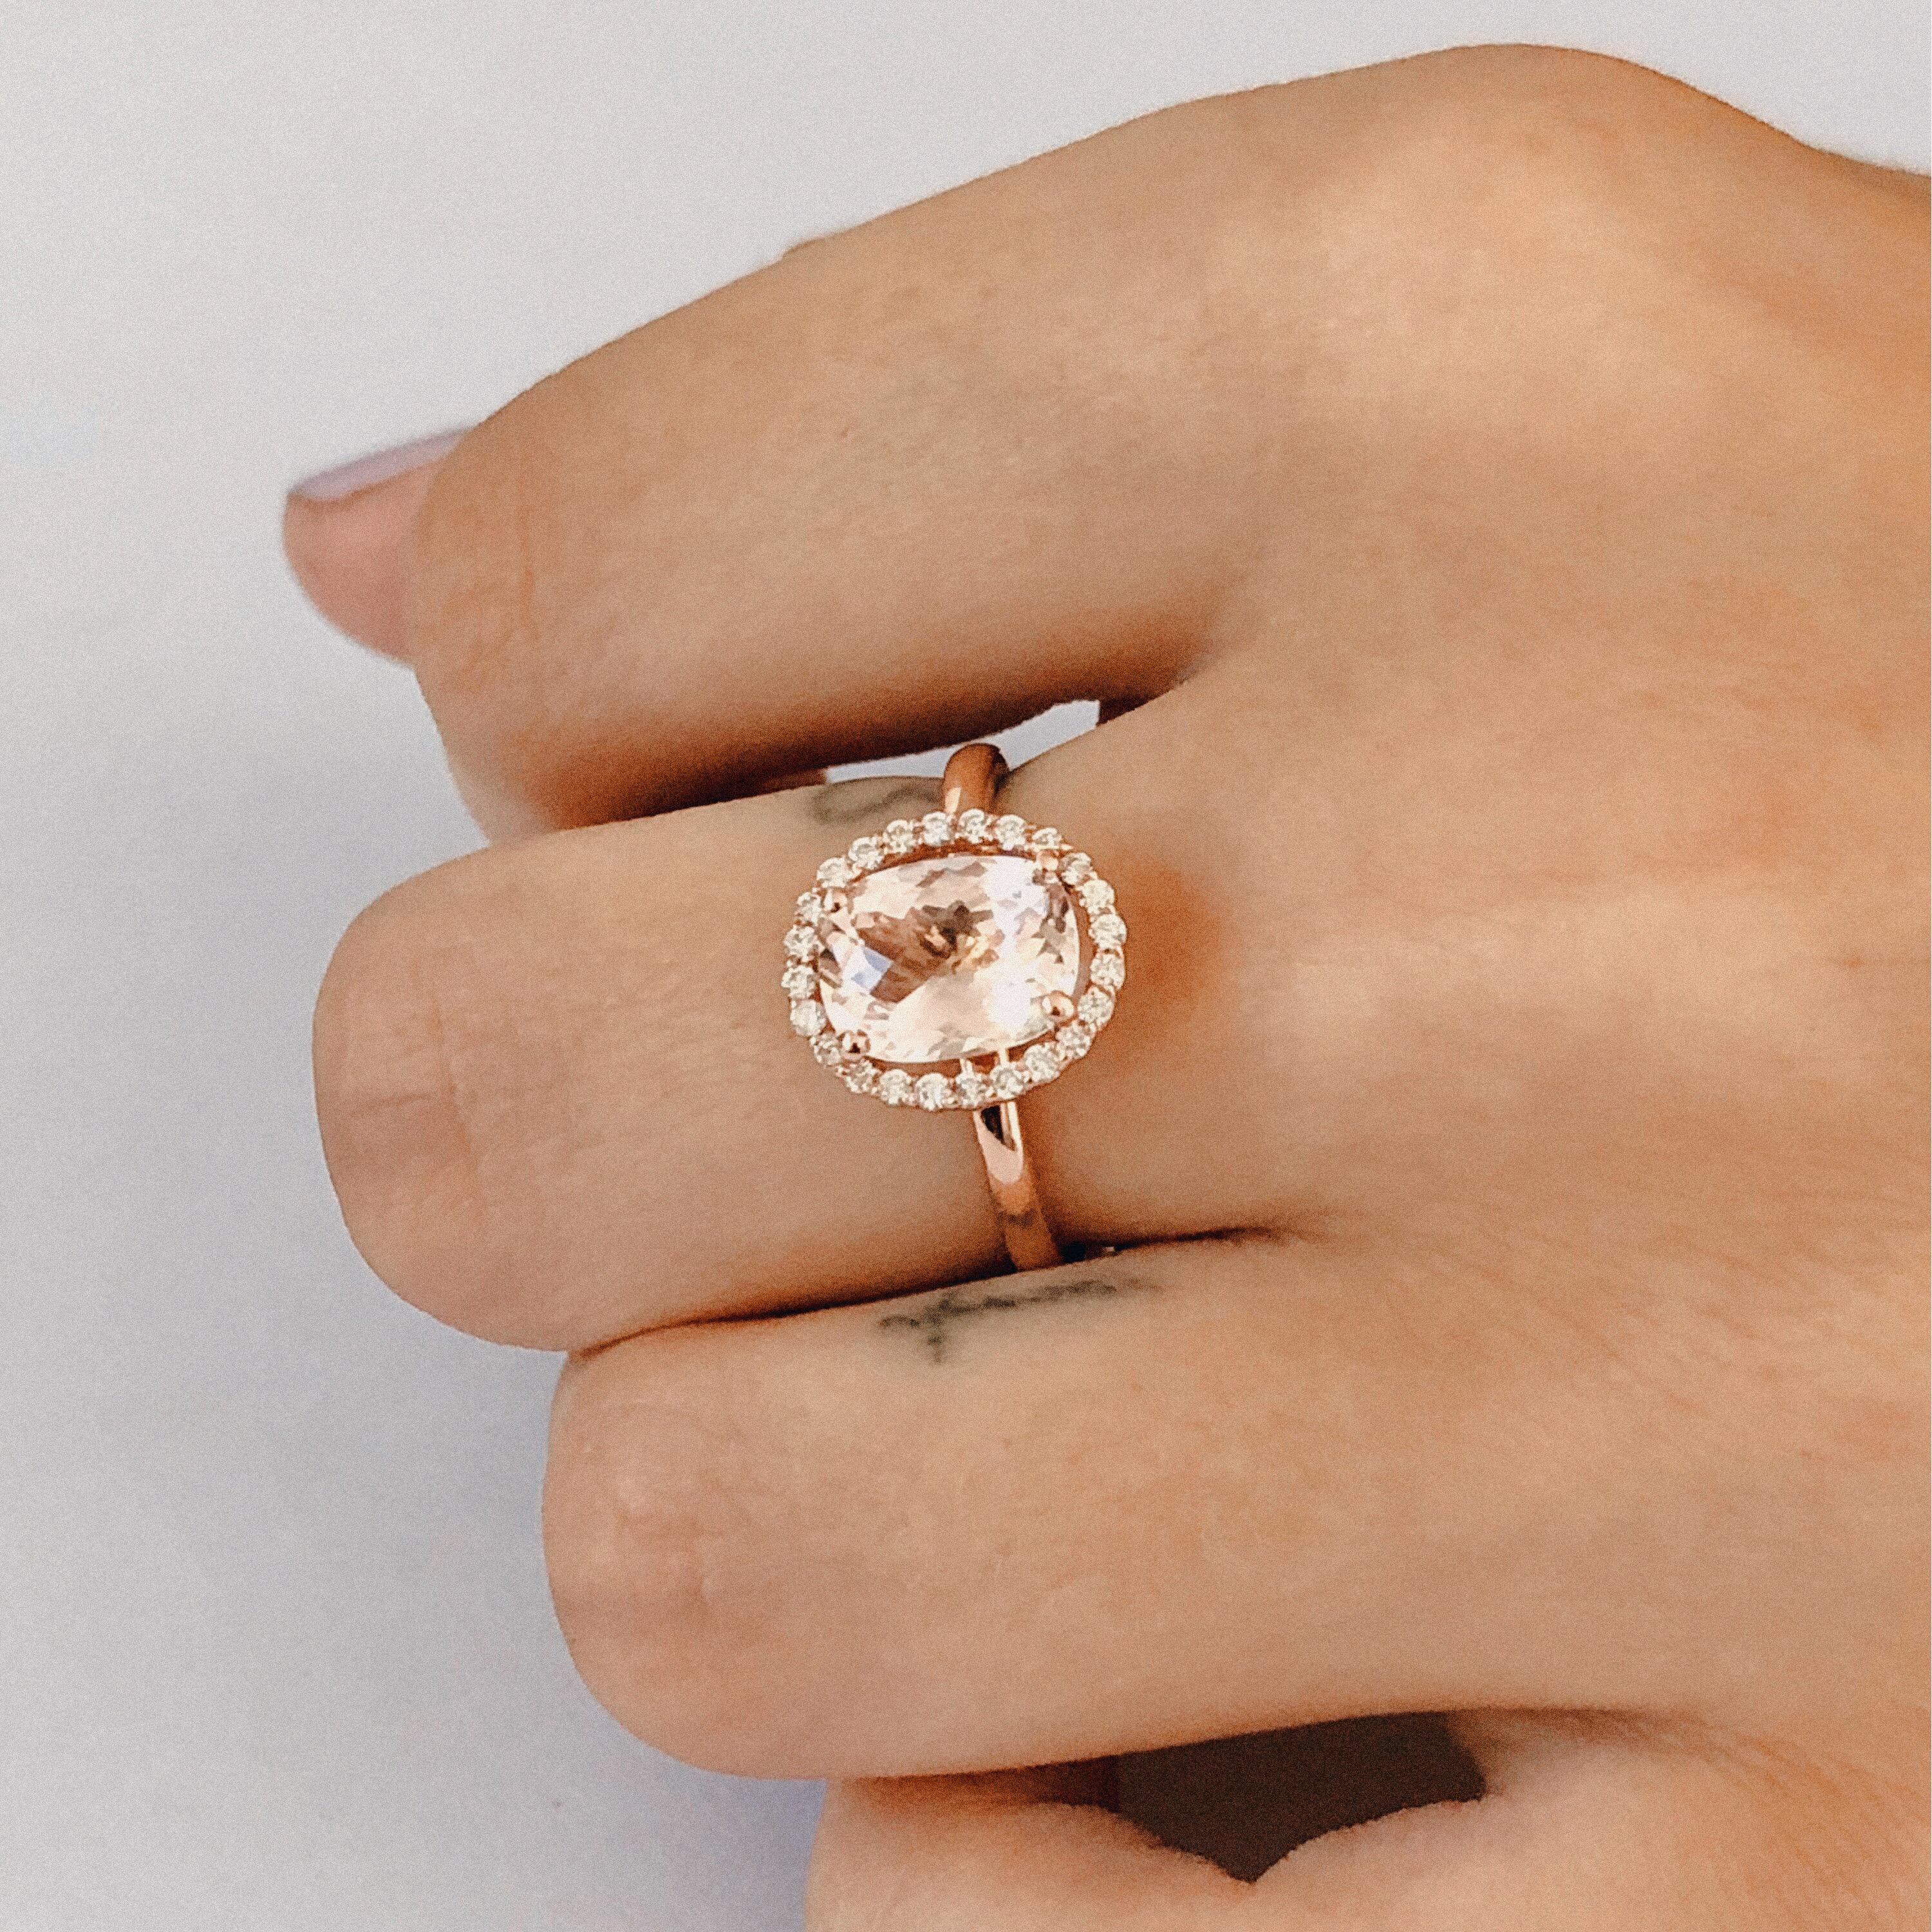 14 Karat rose gold cocktail ring 
Oval shape morganite weighing 2 carat 
Halo diamond ring 
Surrounded by pave set diamonds weighing 0.34 carat
Ring size 7 In Stock
New Ring
Ring can be resized 

